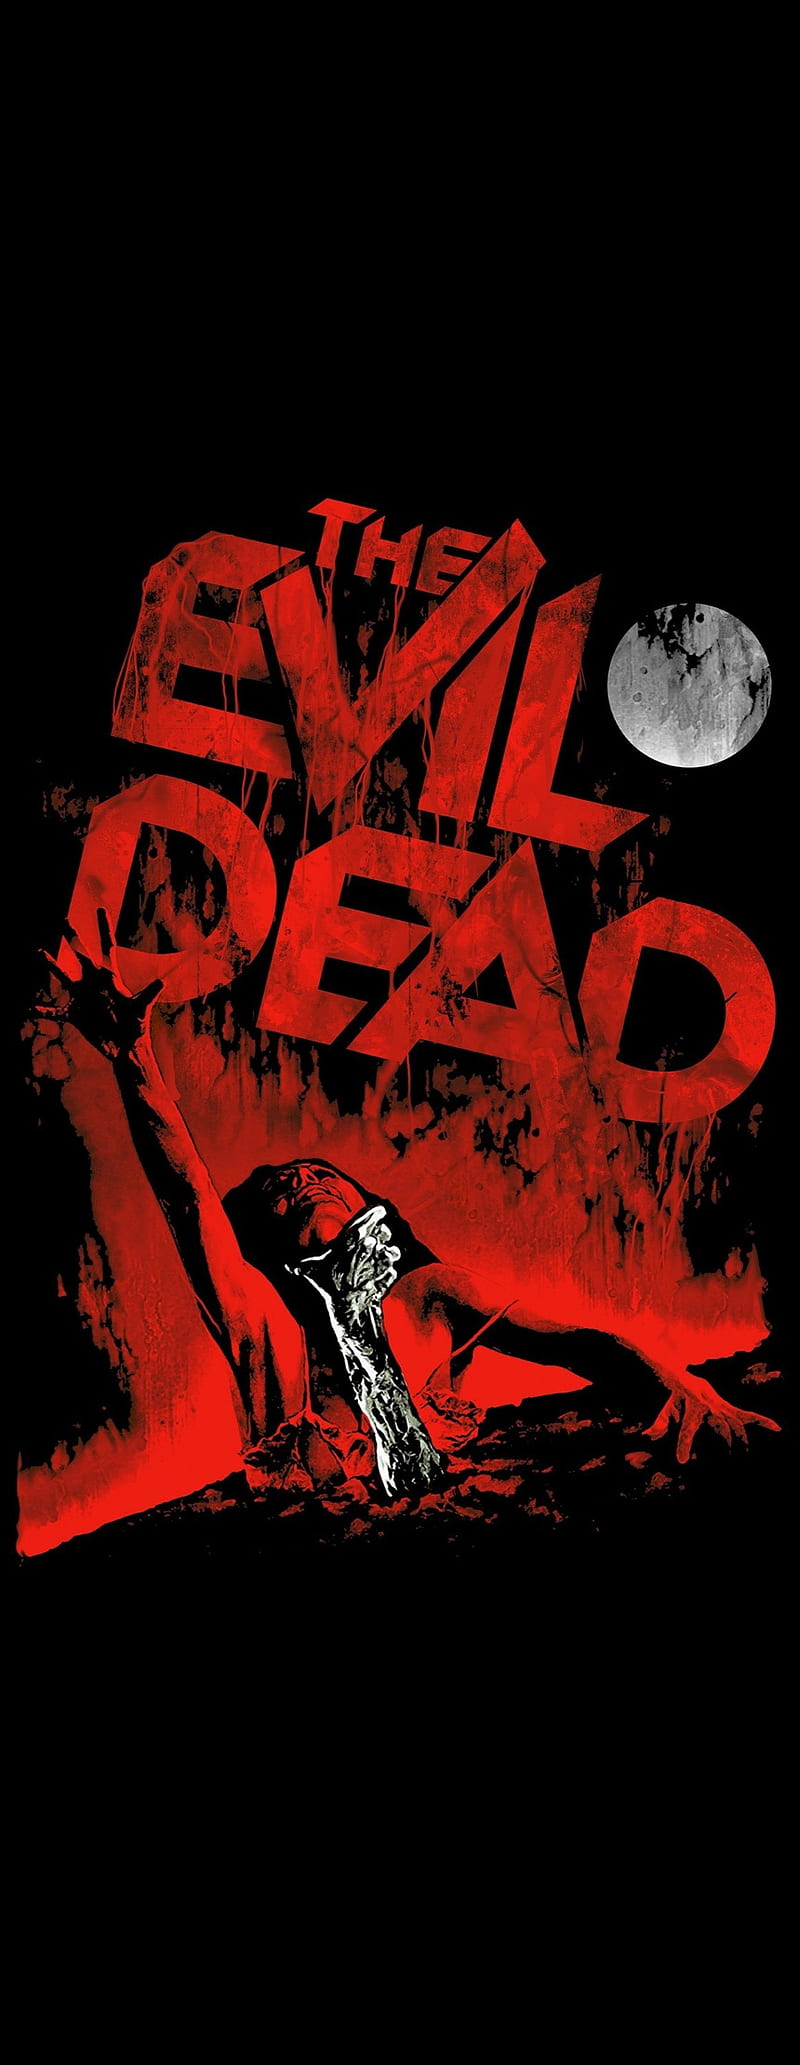 Download Evil Dead Zombies android on PC